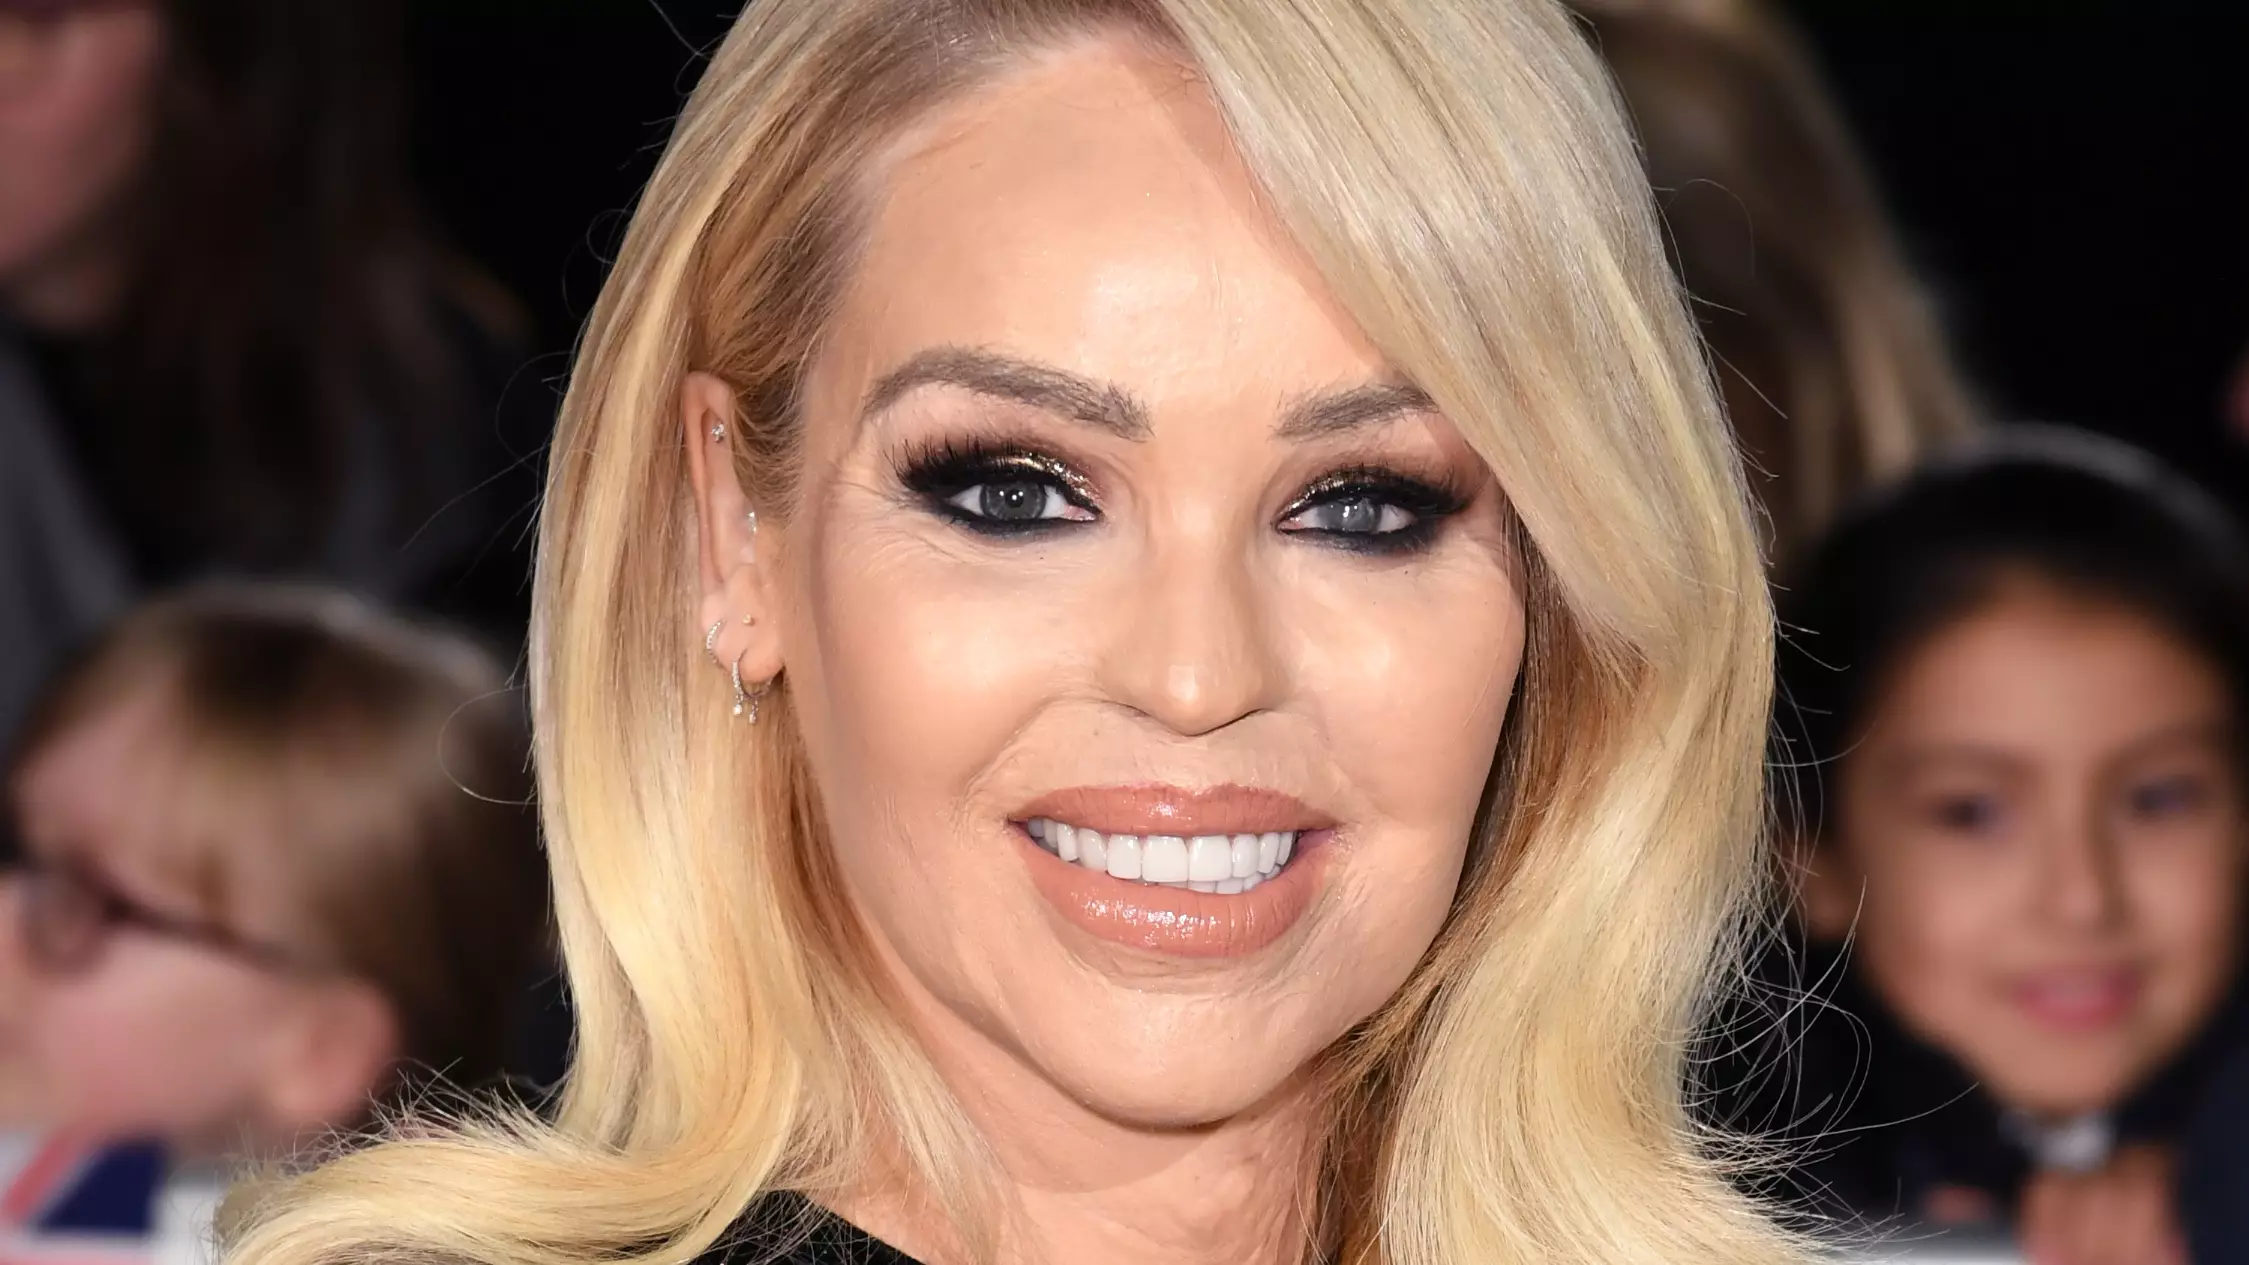 Katie Piper Is Losing Sleep Because Her Attacker Could Soon Be Released